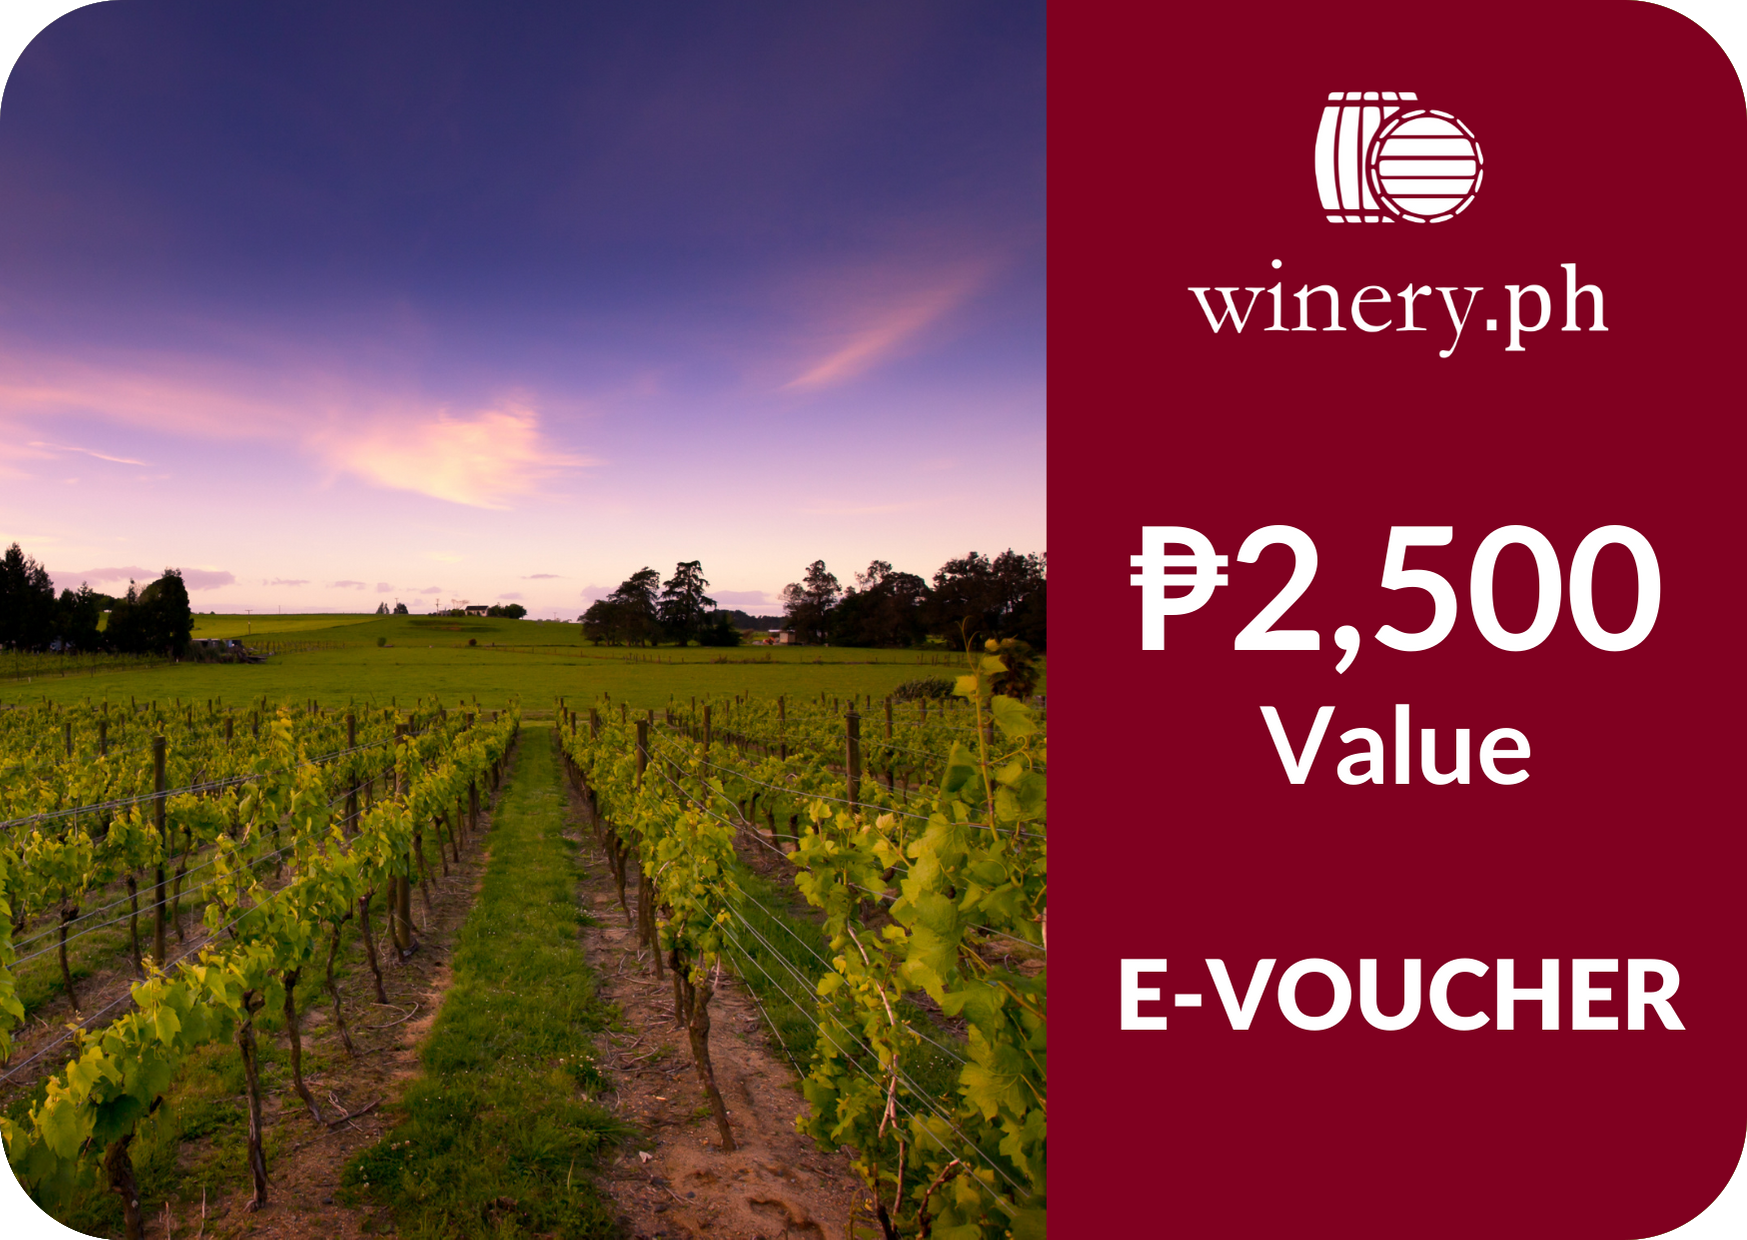 Two Thousand Five Hundred Peso (Php 2,500) Winery.ph e-Voucher